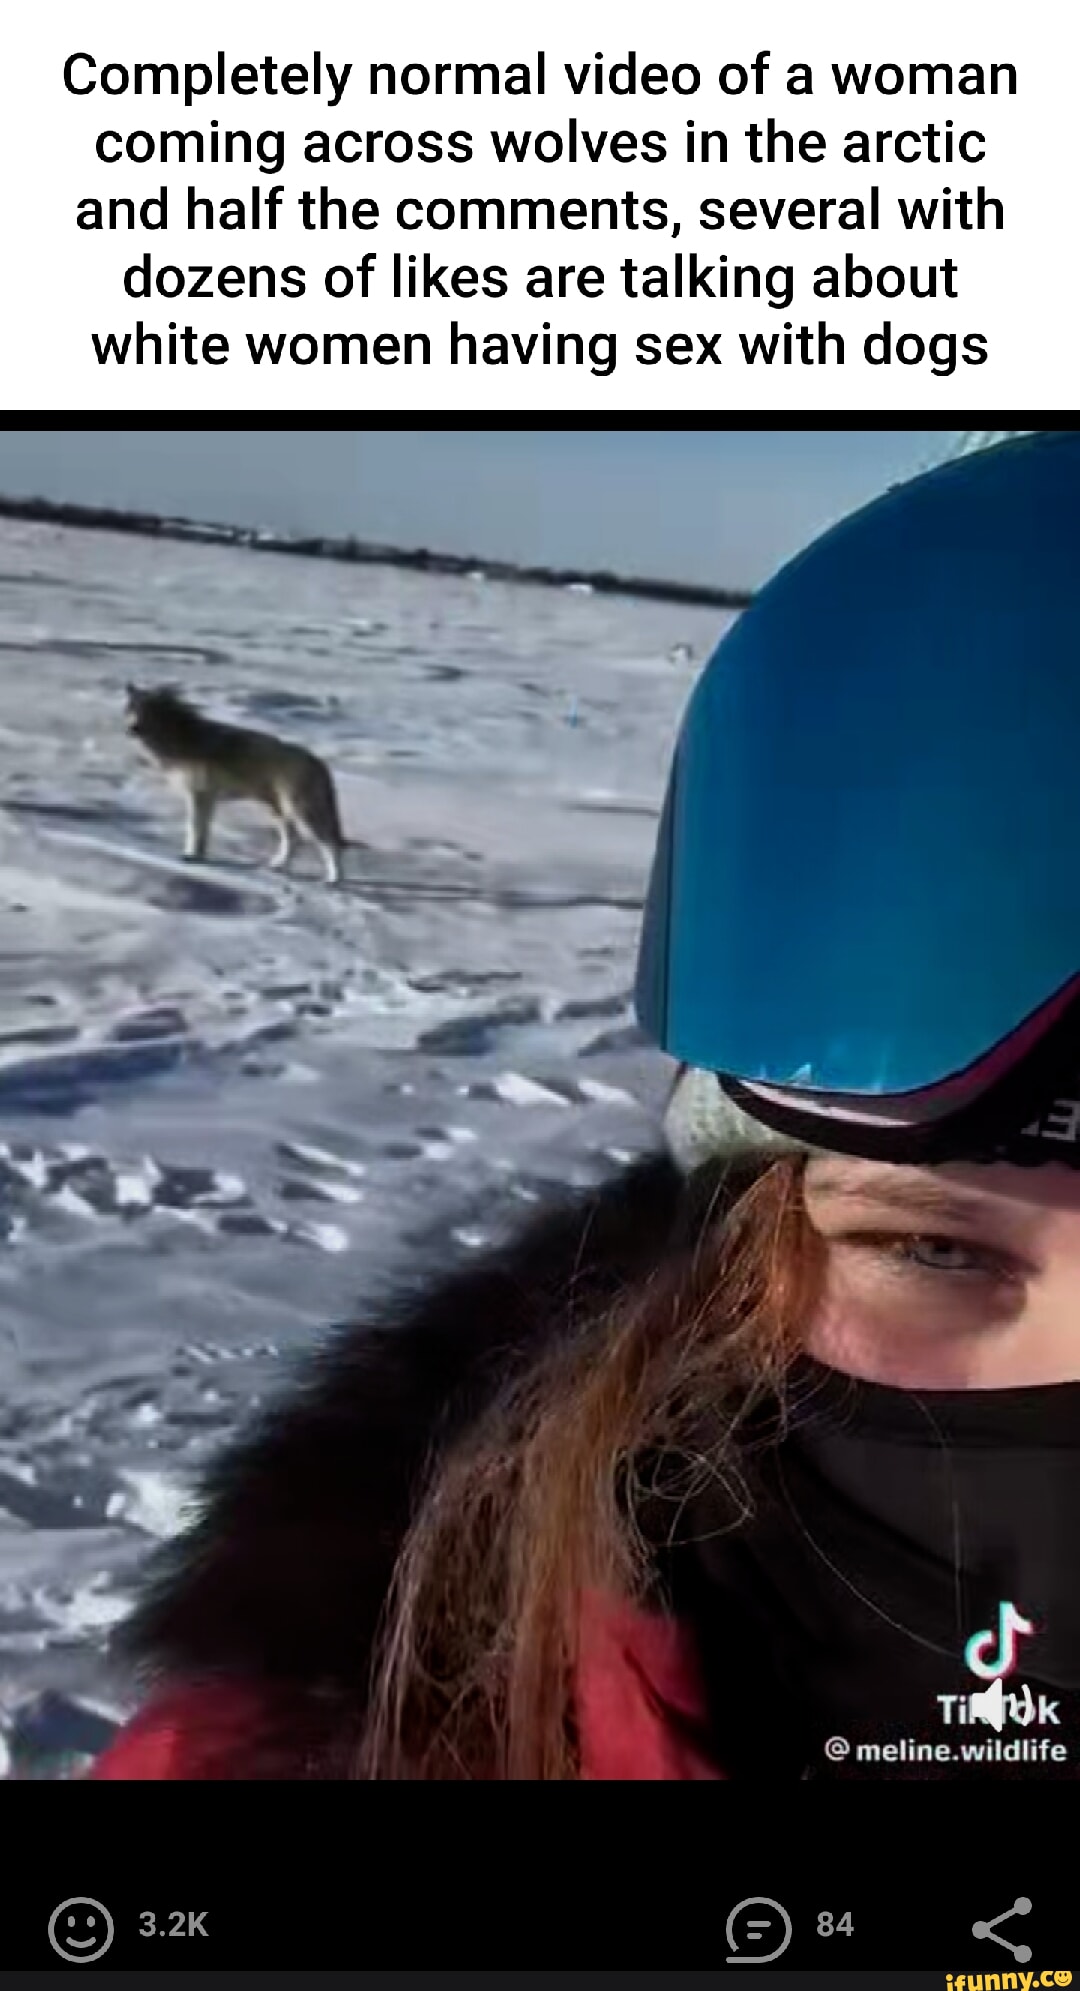 Completely normal video of a woman coming across wolves in the arctic and half the comments, pic